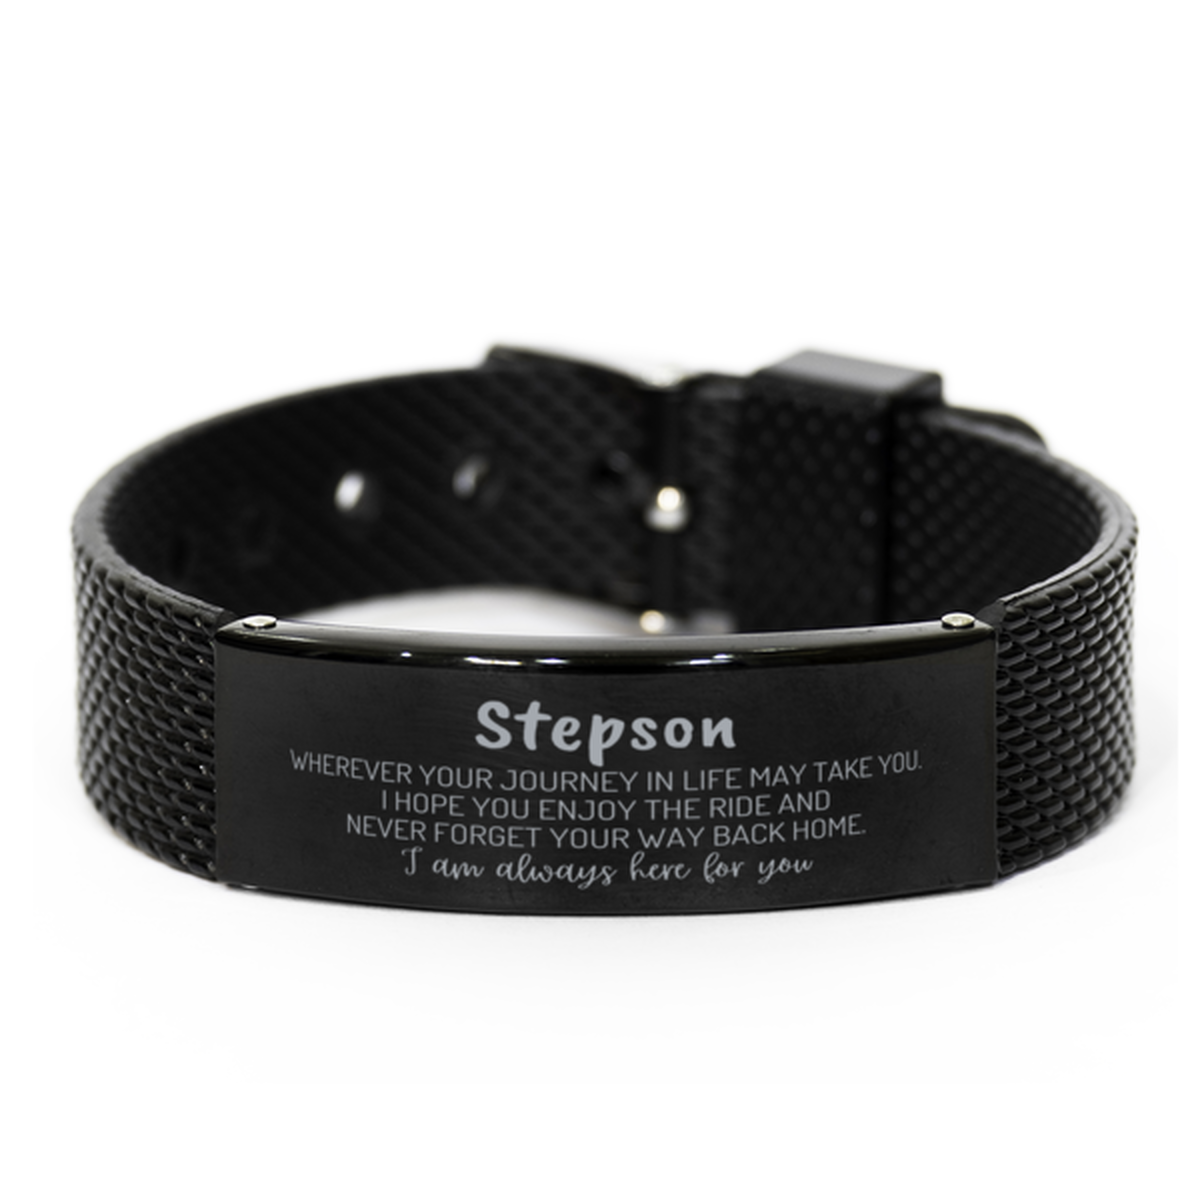 Stepson wherever your journey in life may take you, I am always here for you Stepson Black Shark Mesh Bracelet, Awesome Christmas Gifts For Stepson, Stepson Birthday Gifts for Men Women Family Loved One